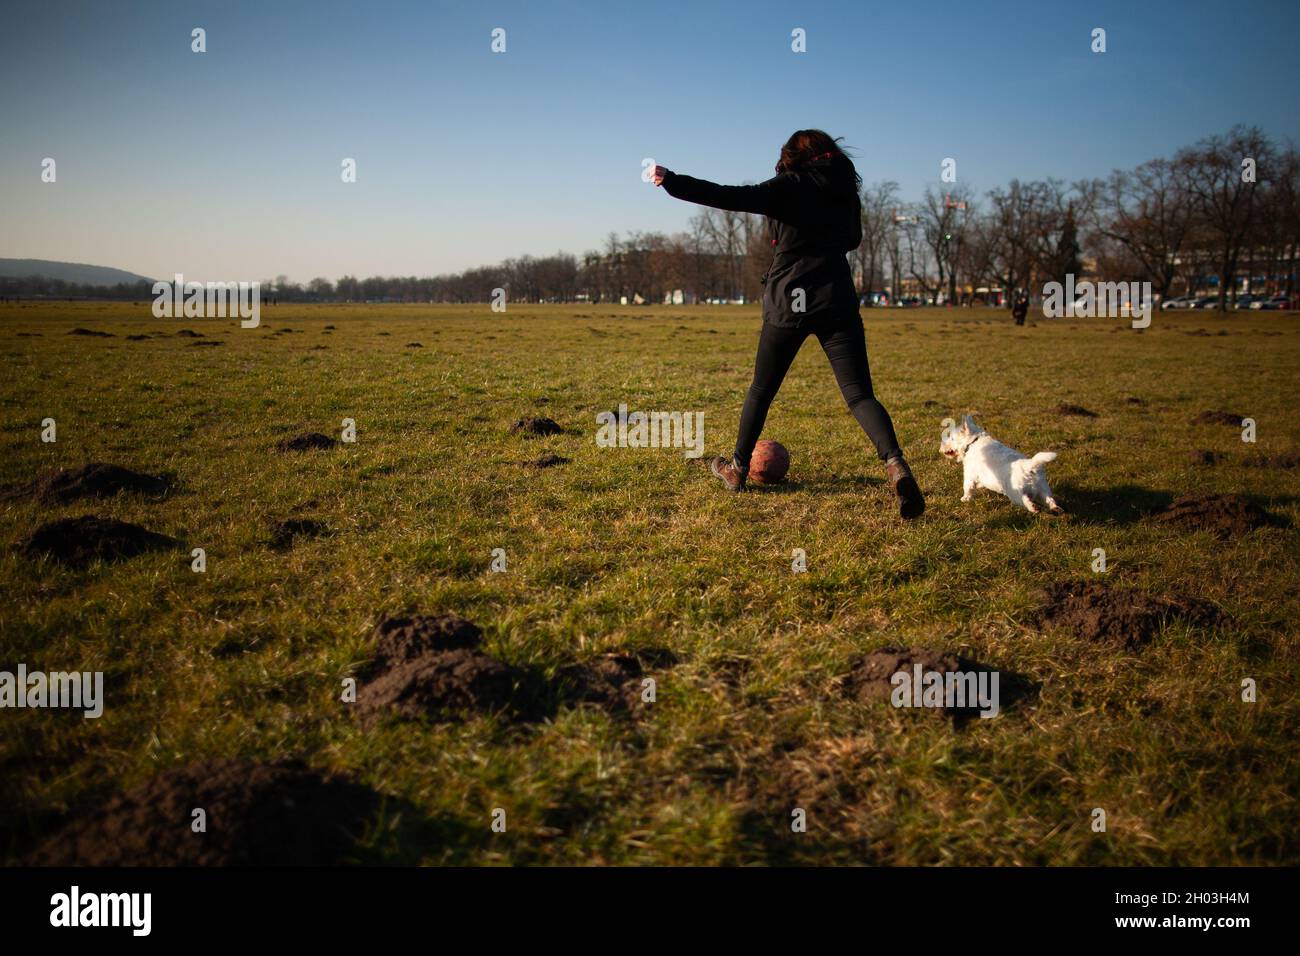 West highland white terrier dog playing a ball with his owner on grass outdoors, back view of girl kicking the ball and westie dog chasing after it Stock Photo